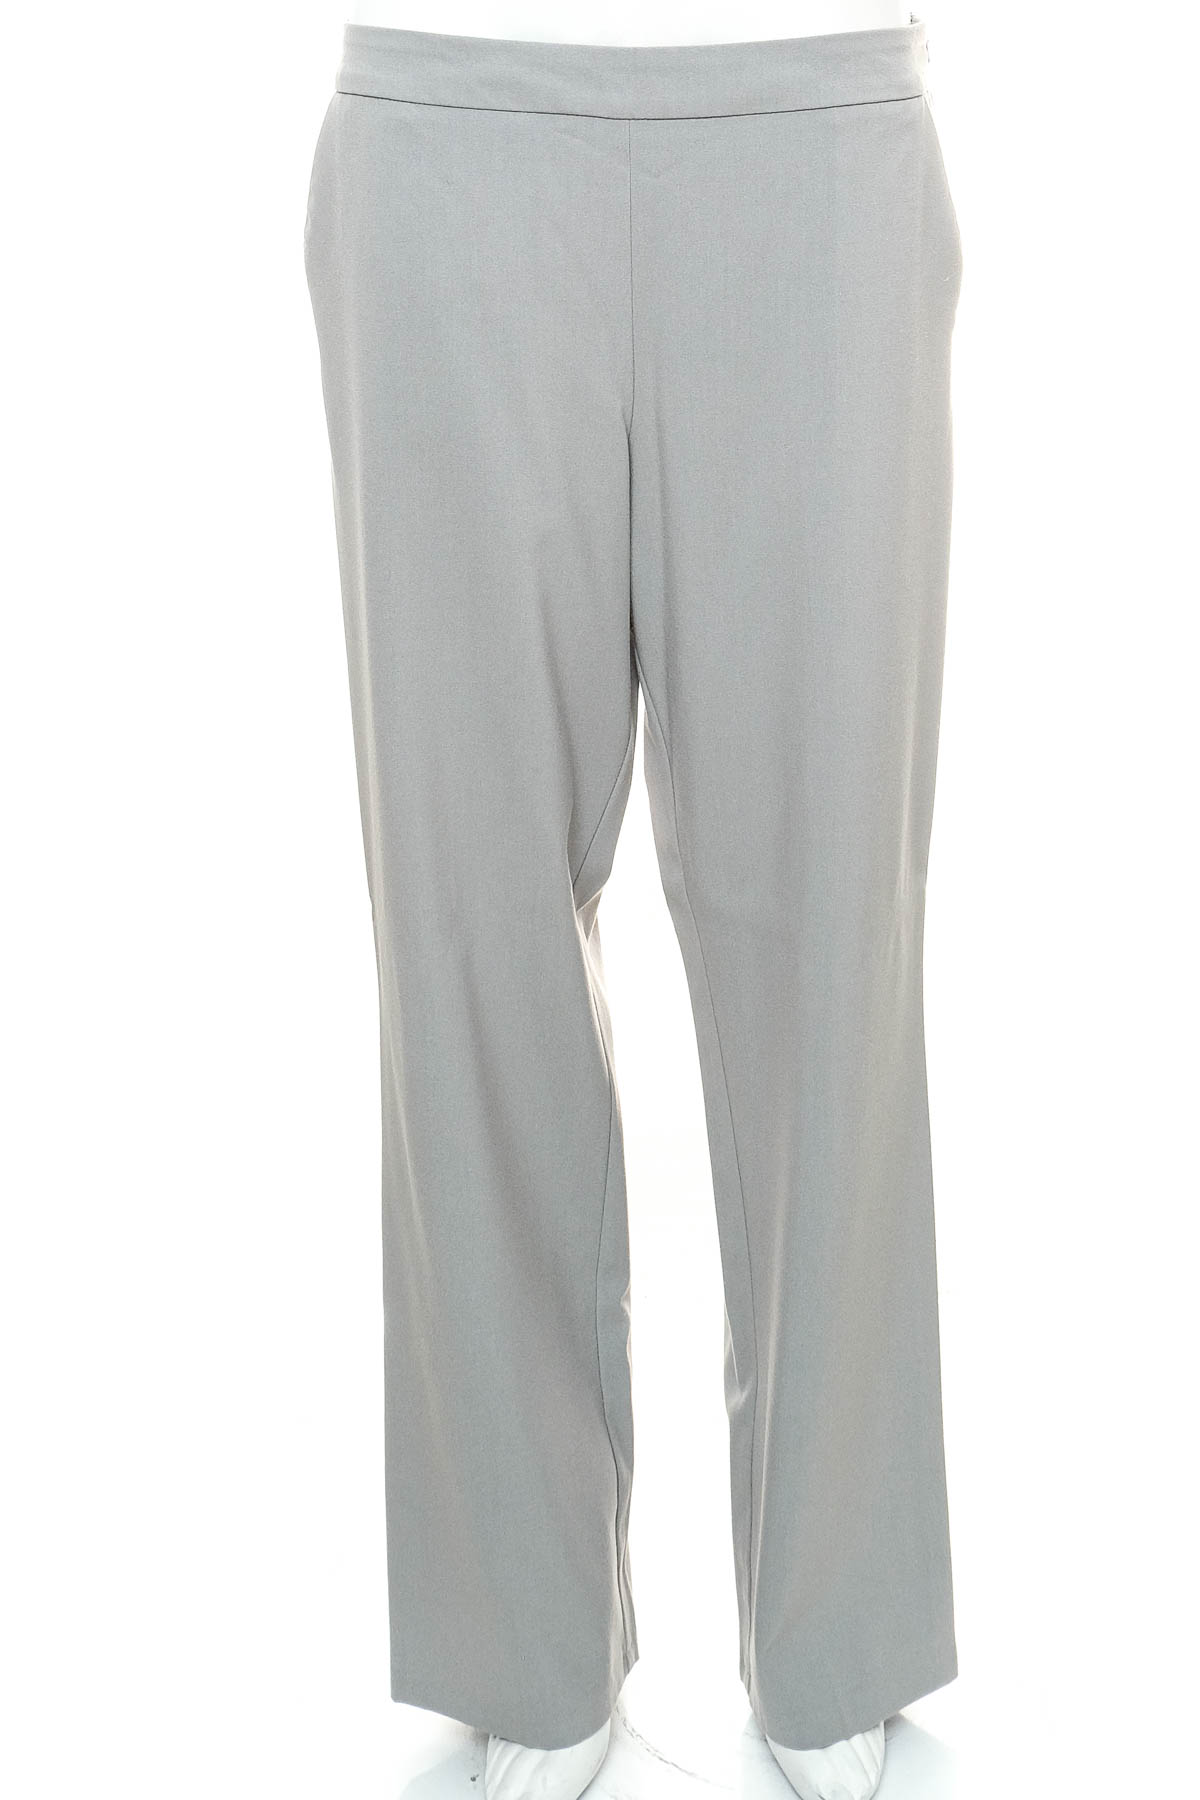 Women's trousers - M&S COLLECTION - 0